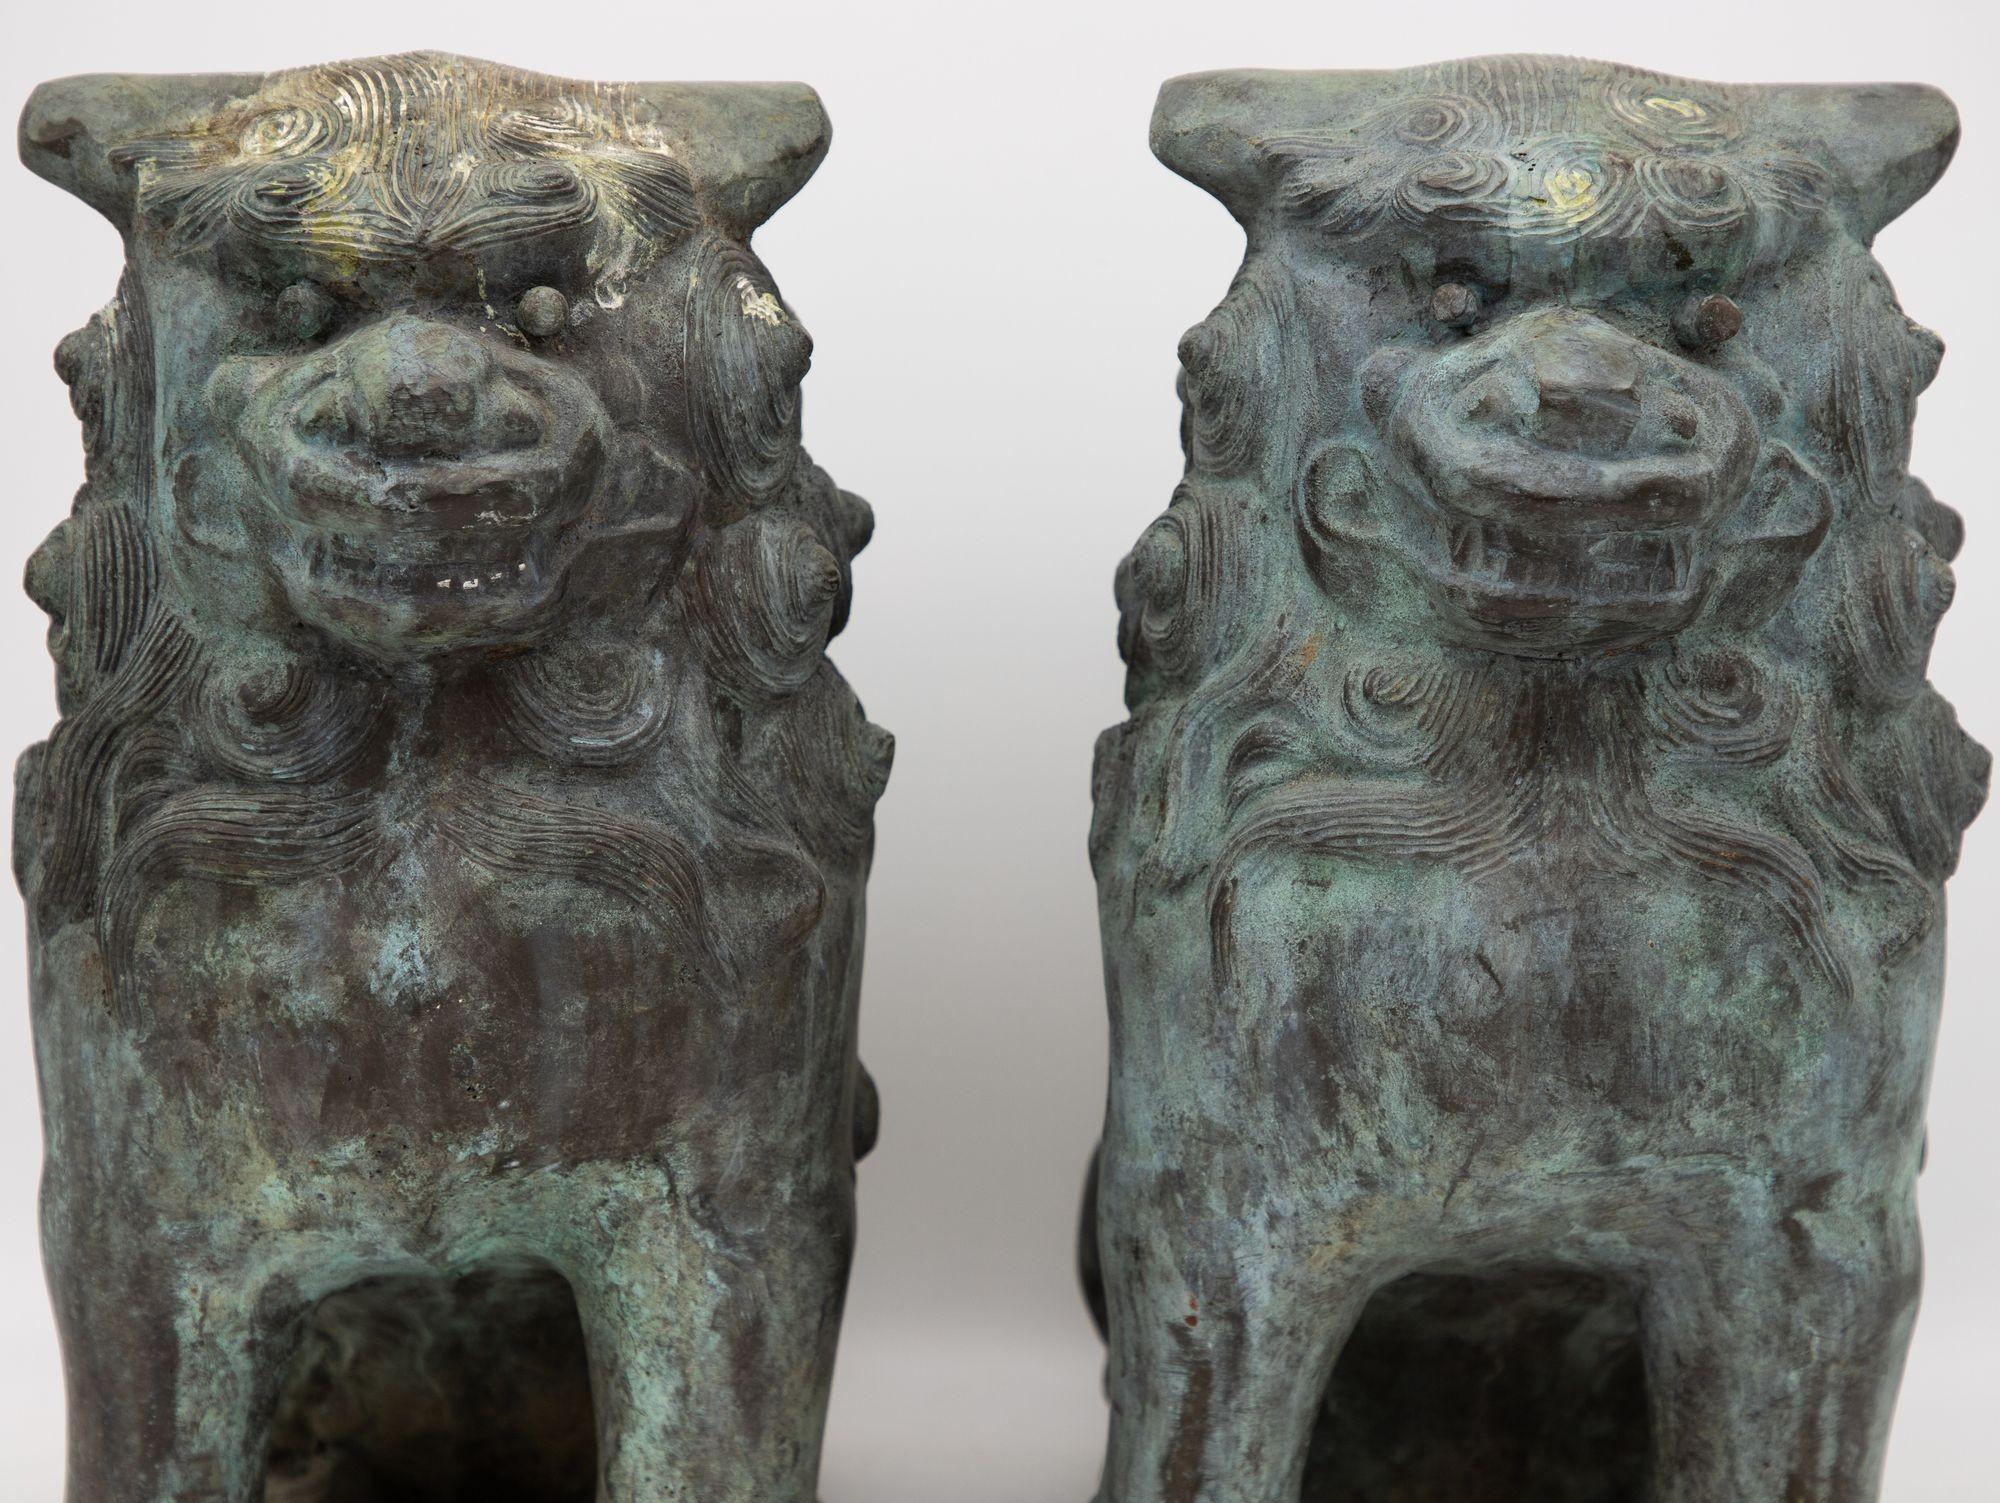 A captivating duo of bronze Foo Dogs, dating back to the early 20th century, exudes timeless charm. These exquisite guardians stand as a testament to artistic craftsmanship, with intricate detailing that brings the creatures to life. The elegant